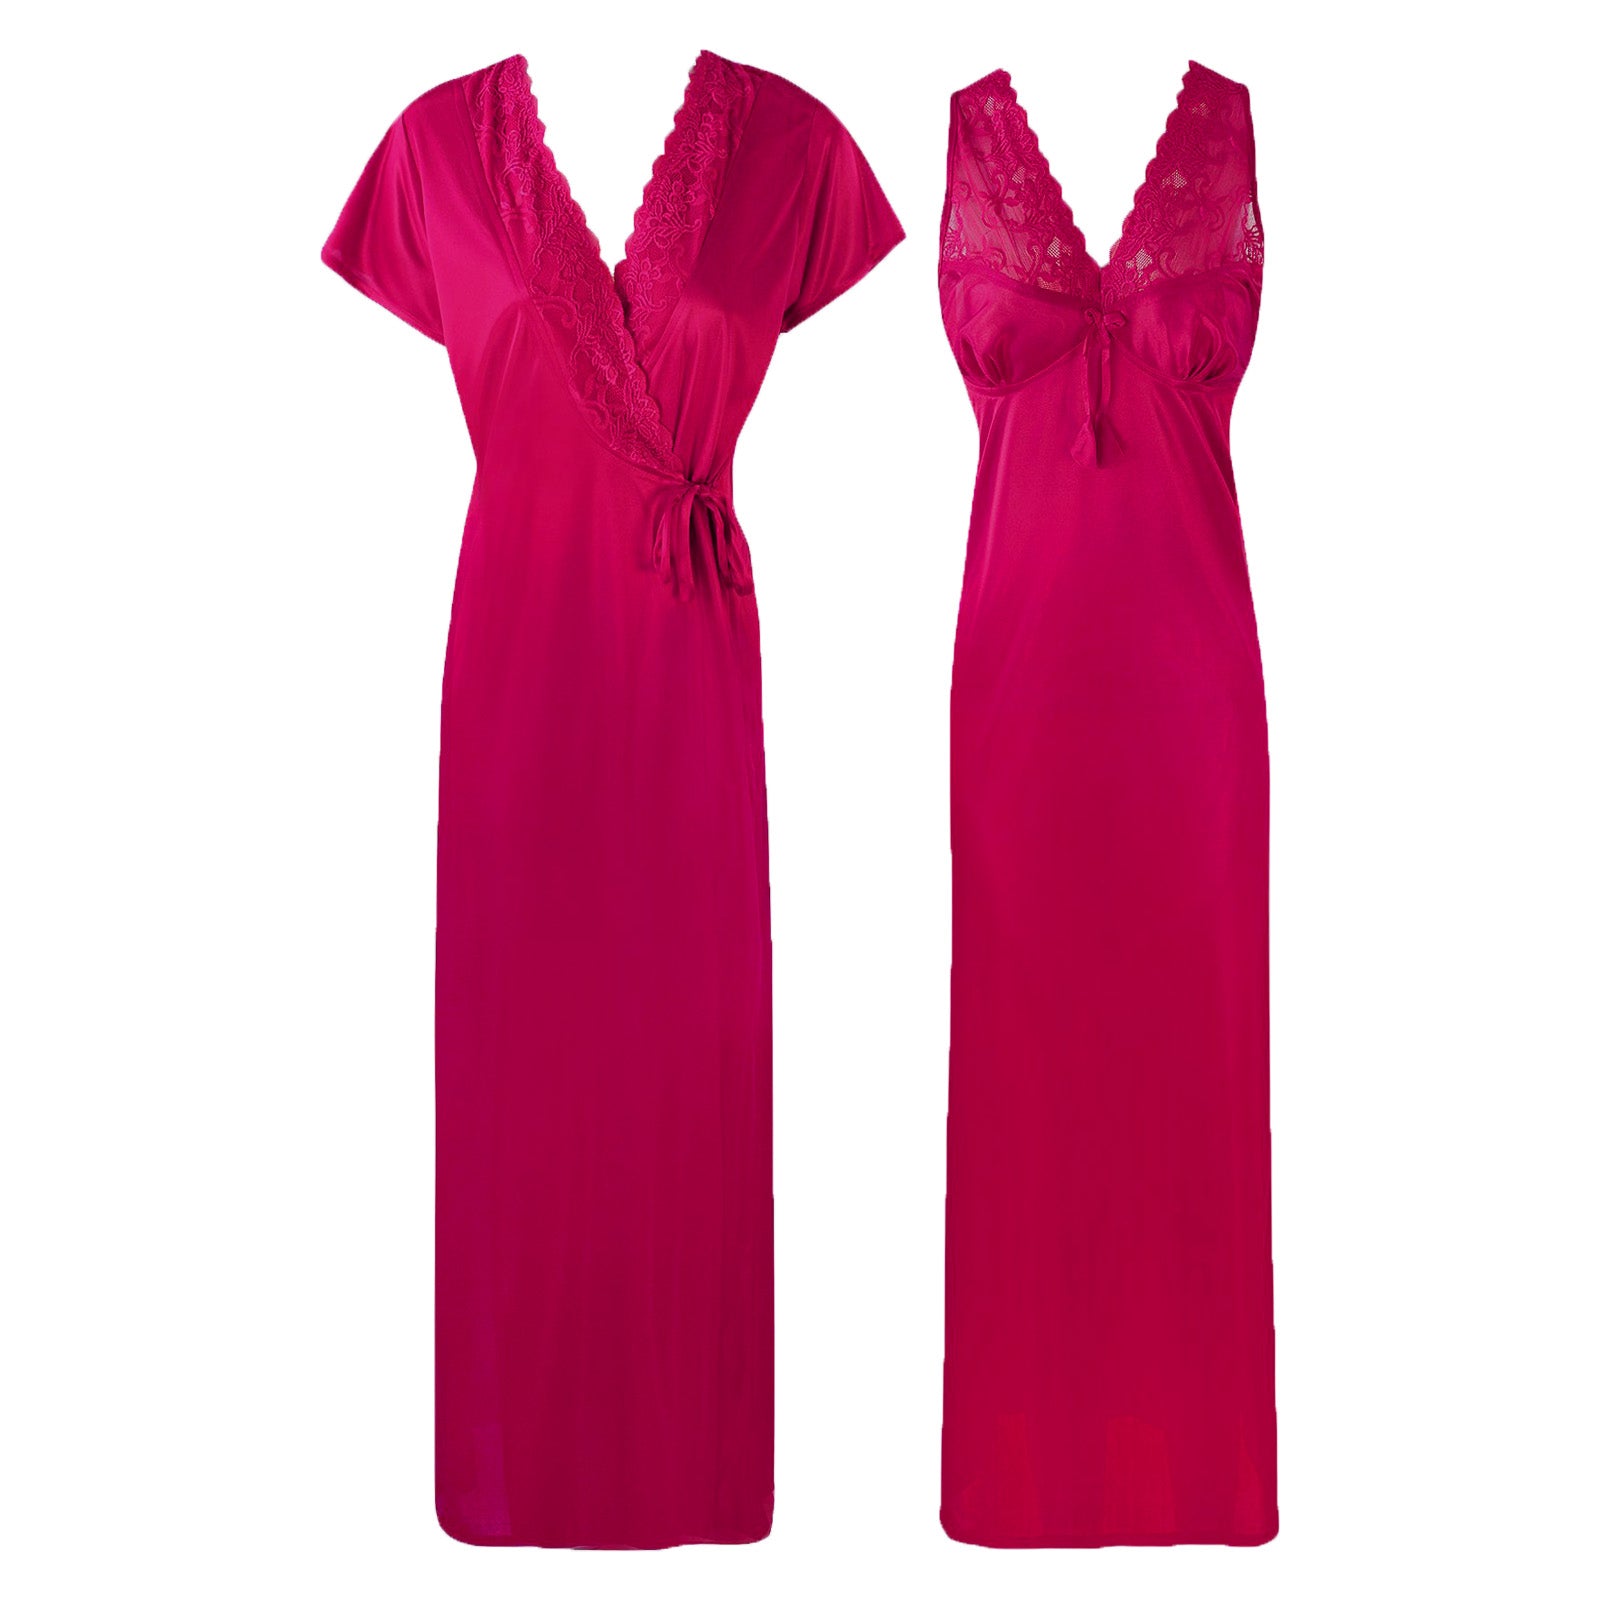 Fuchsia / One Size The Orange Tags Womens Satin Long Nightdress Lace Detailed The Orange Tags